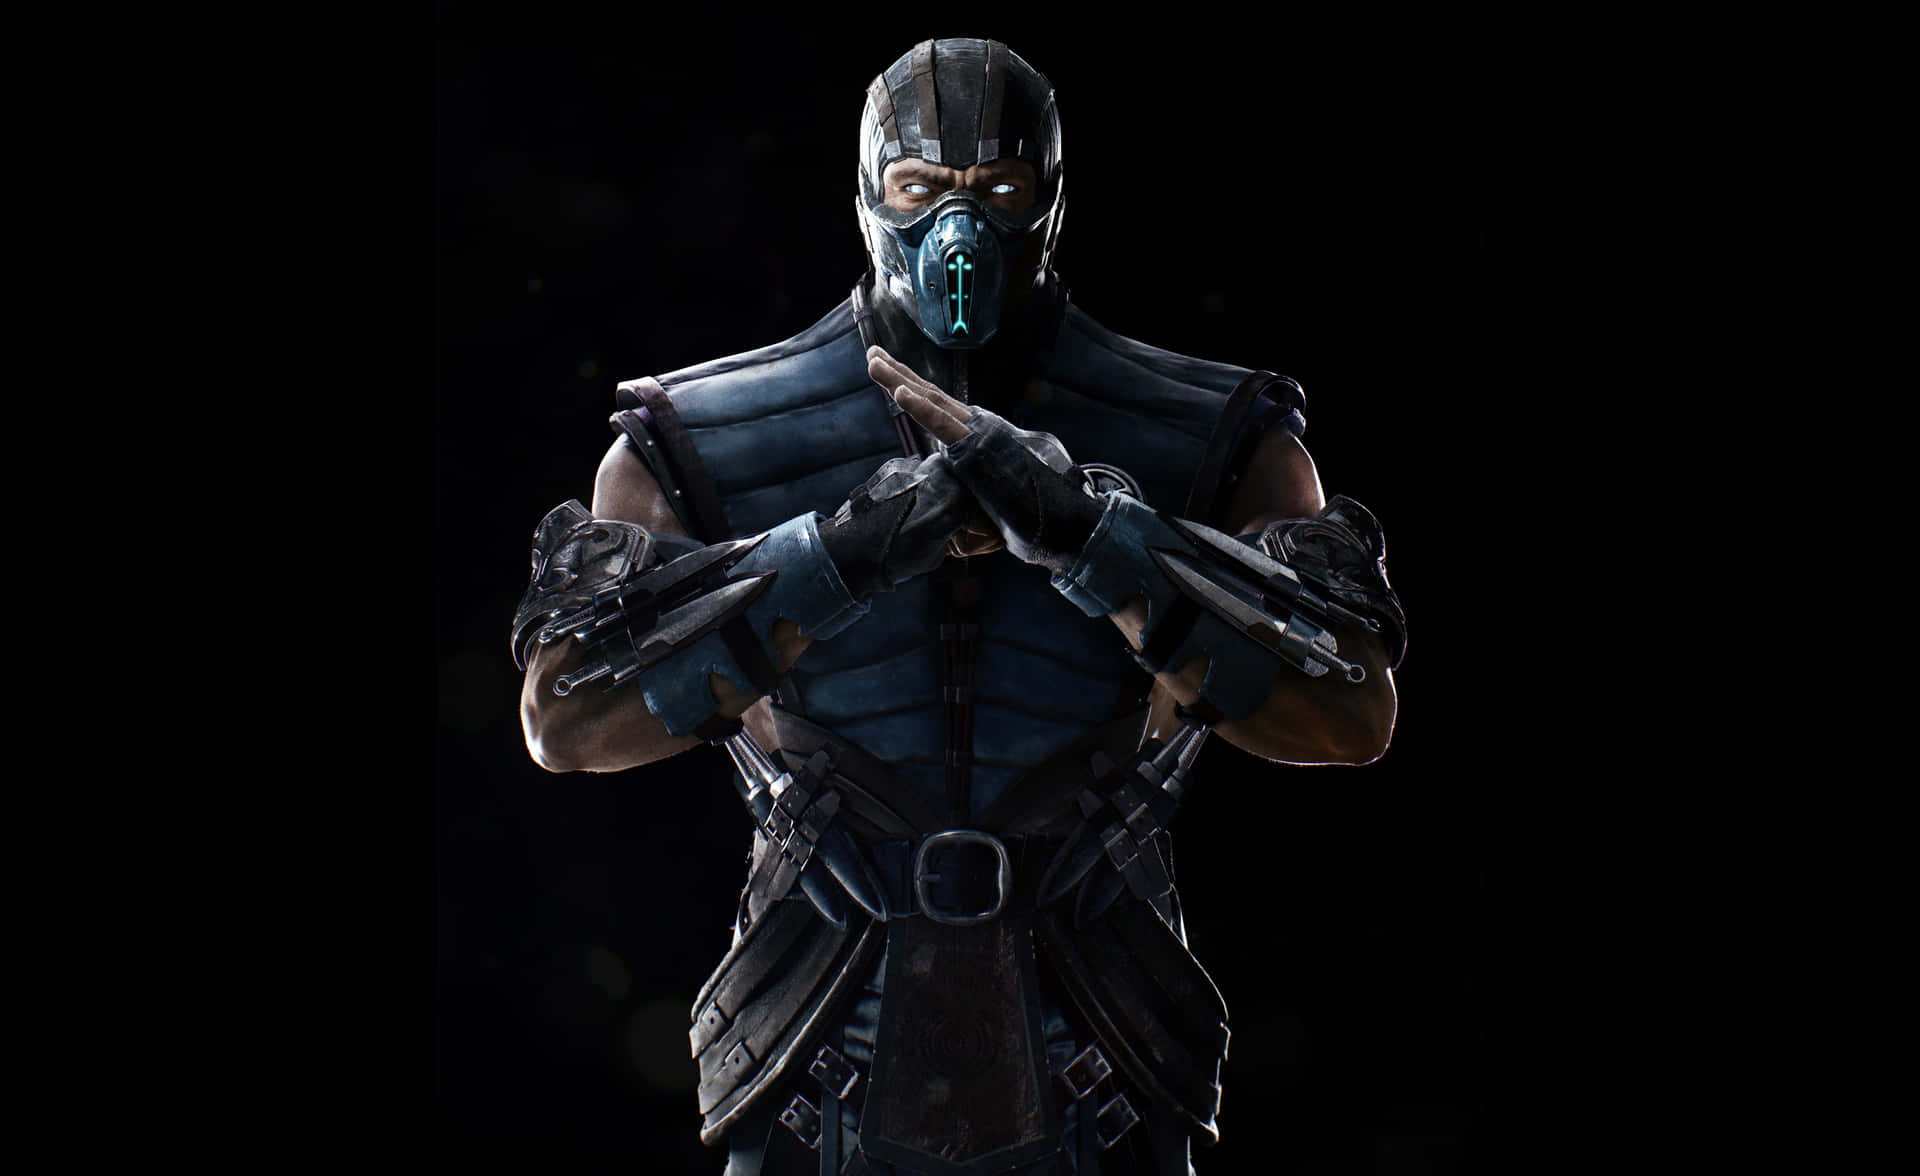 Join the fight in the deadly world of Mortal Kombat